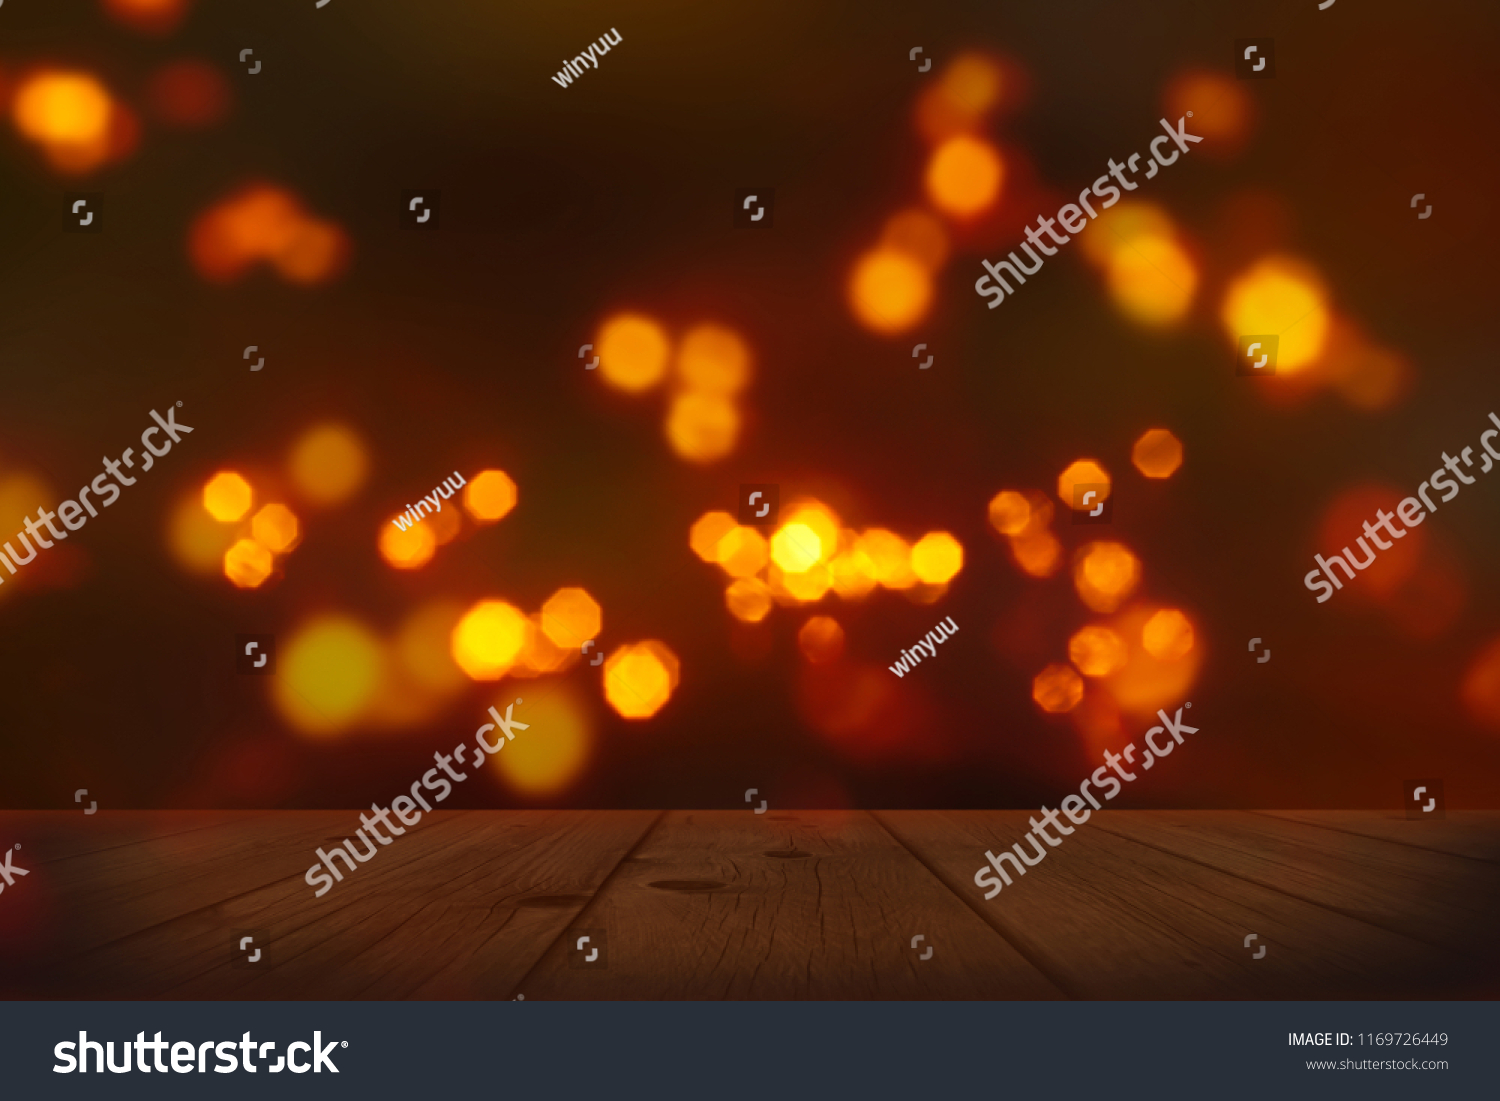 festive background with blurry lights, empty wooden table in foreground with bright candlelight bokeh on dark blurred backdrop, celebration at night concept #1169726449